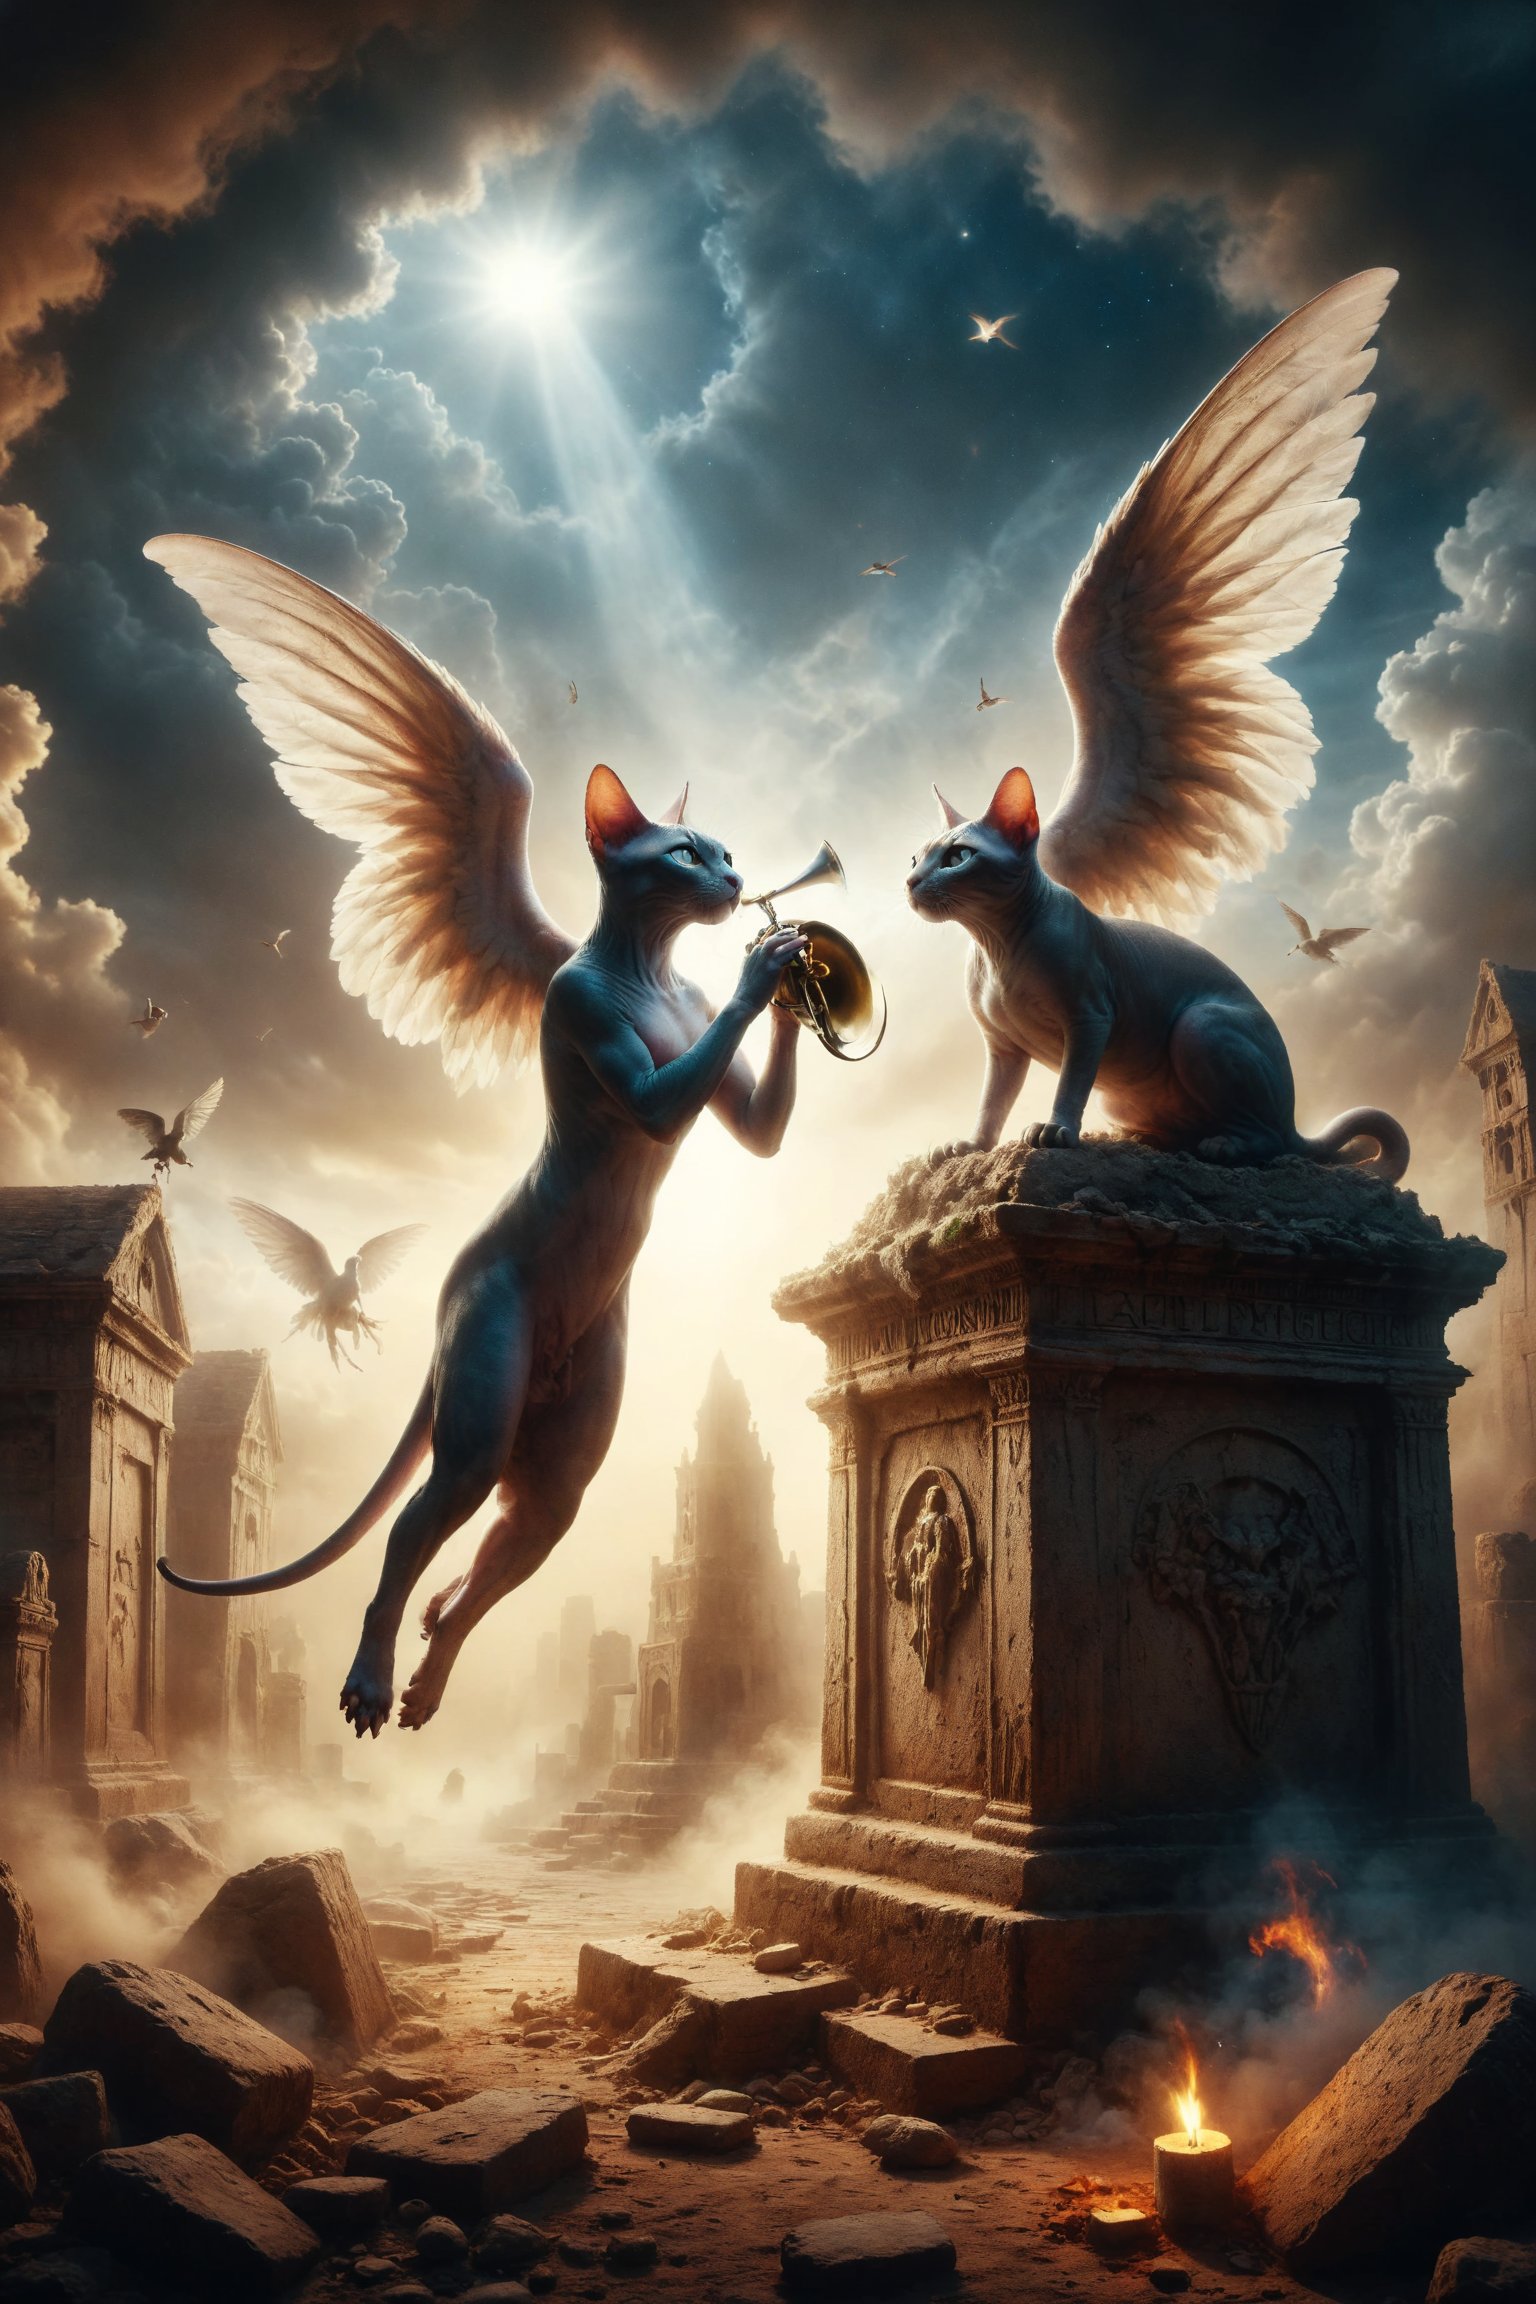 Design an image of a Sphynx cat emerging from a tomb while an angel blows a trumpet in the sky, symbolizing judgement, rebirth, and the call to a higher purpose.